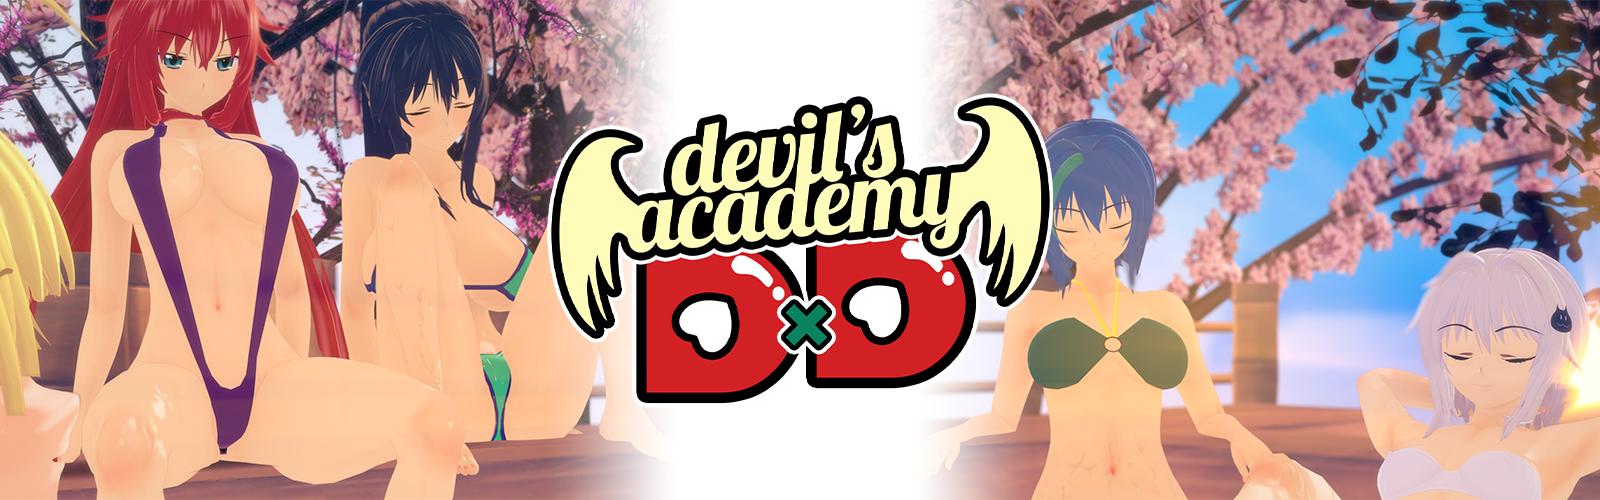 Devil's Academy DxD 1.png